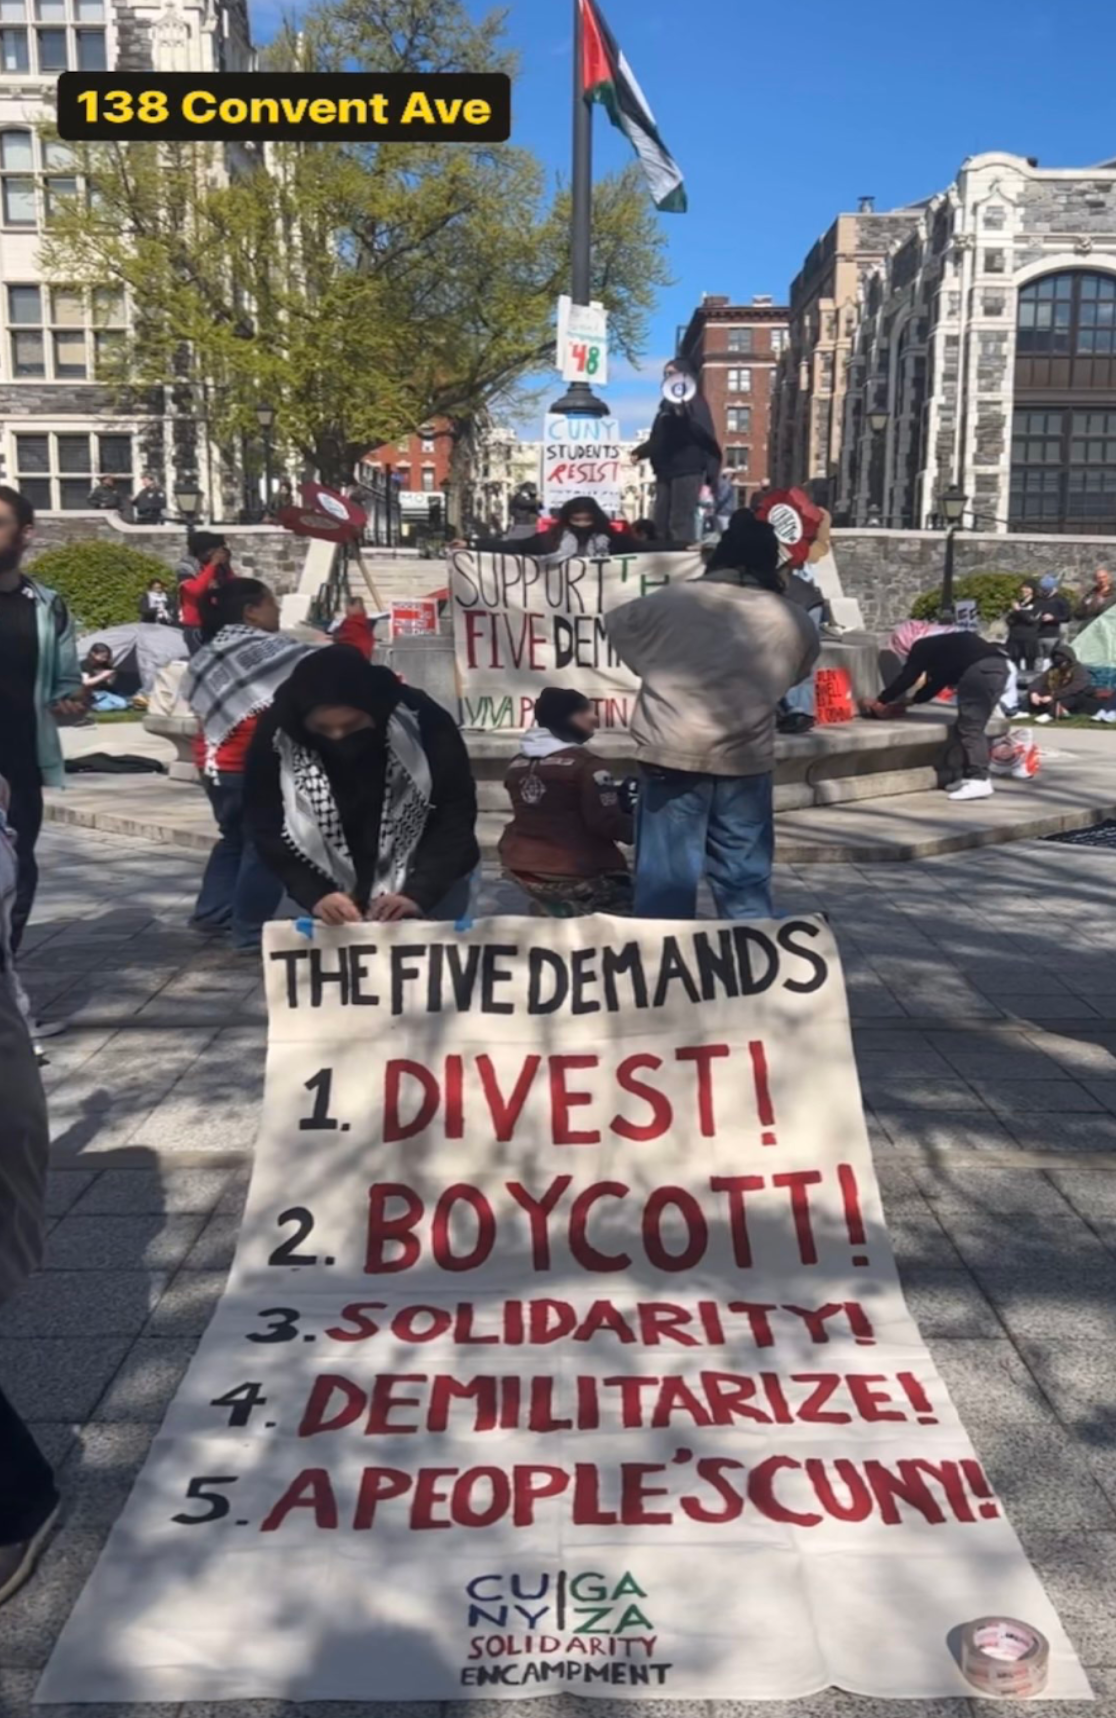 An unfurled banner that reads: The five demands 1. Divest! 2. Boycott! 3. Solidarity! 4. Demilitarize! 5. A people's CUNY